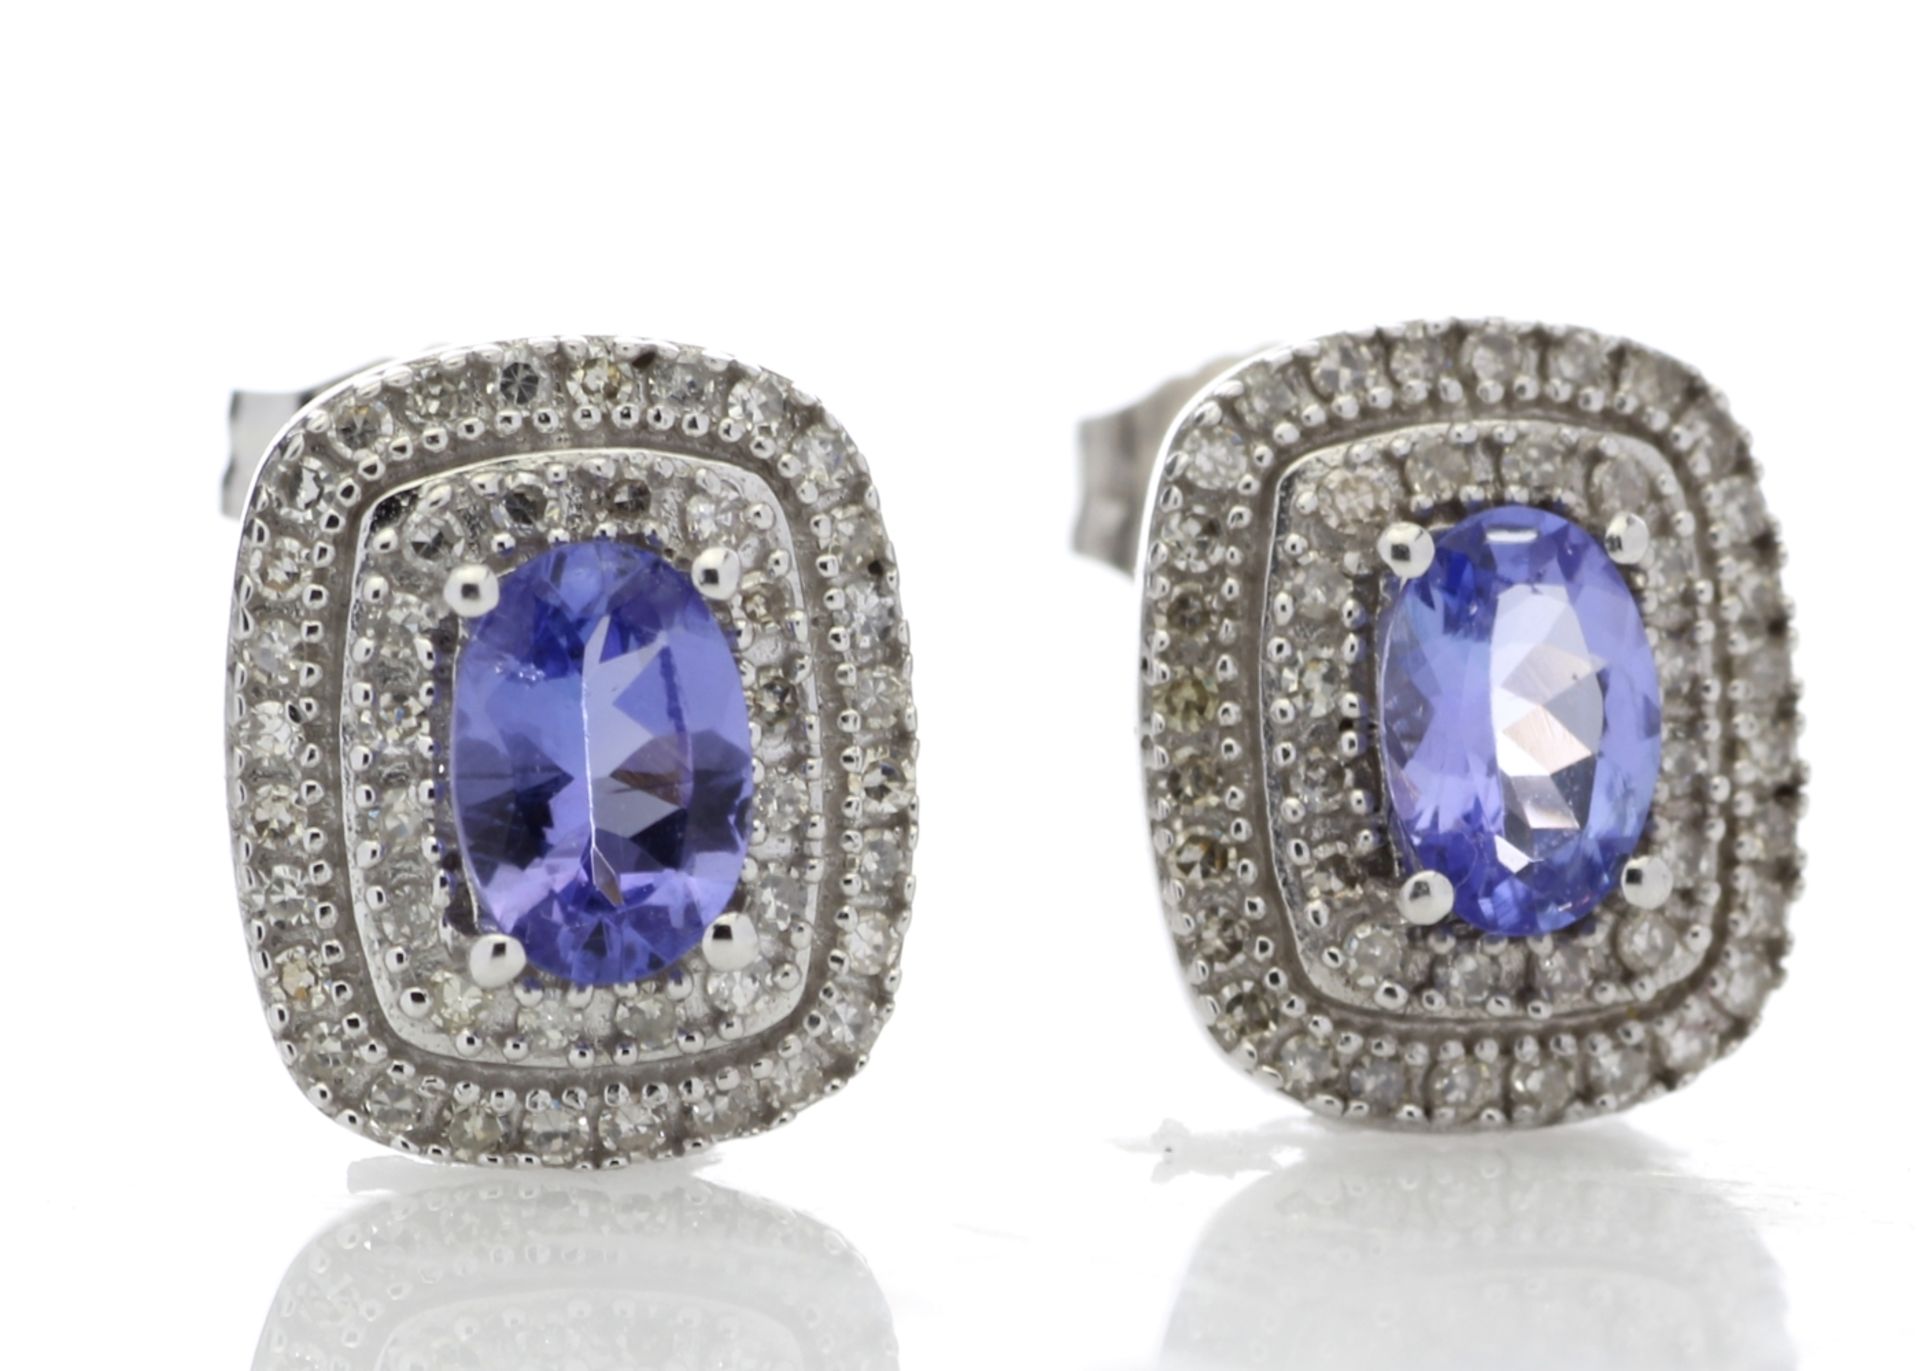 9ct White Gold Oval Diamond And Tanzanite Earring 0.35 Carats - Image 4 of 5